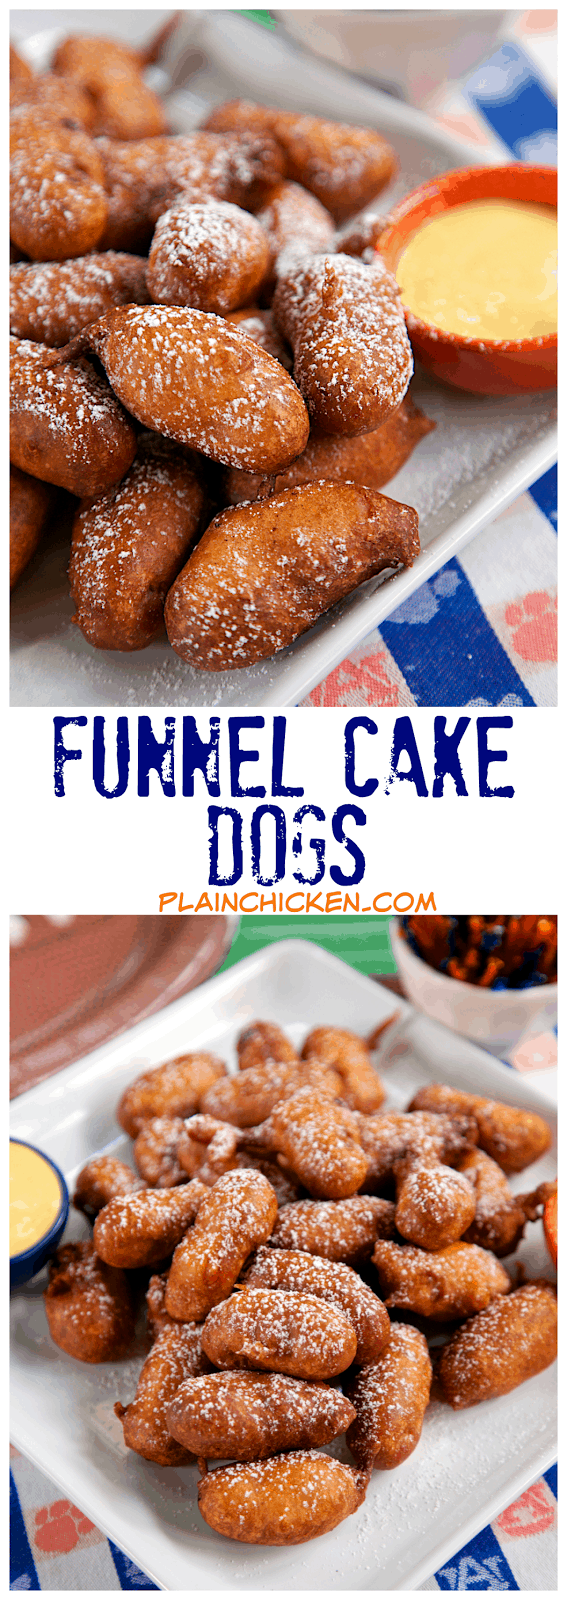 Funnel Cake Dogs Recipe - great for tailgating!! Little Smokies battered and fried. Dip in honey mustard or plain honey. Fun twist on our usual pigs in a blanket. Great party food and tailgating food!